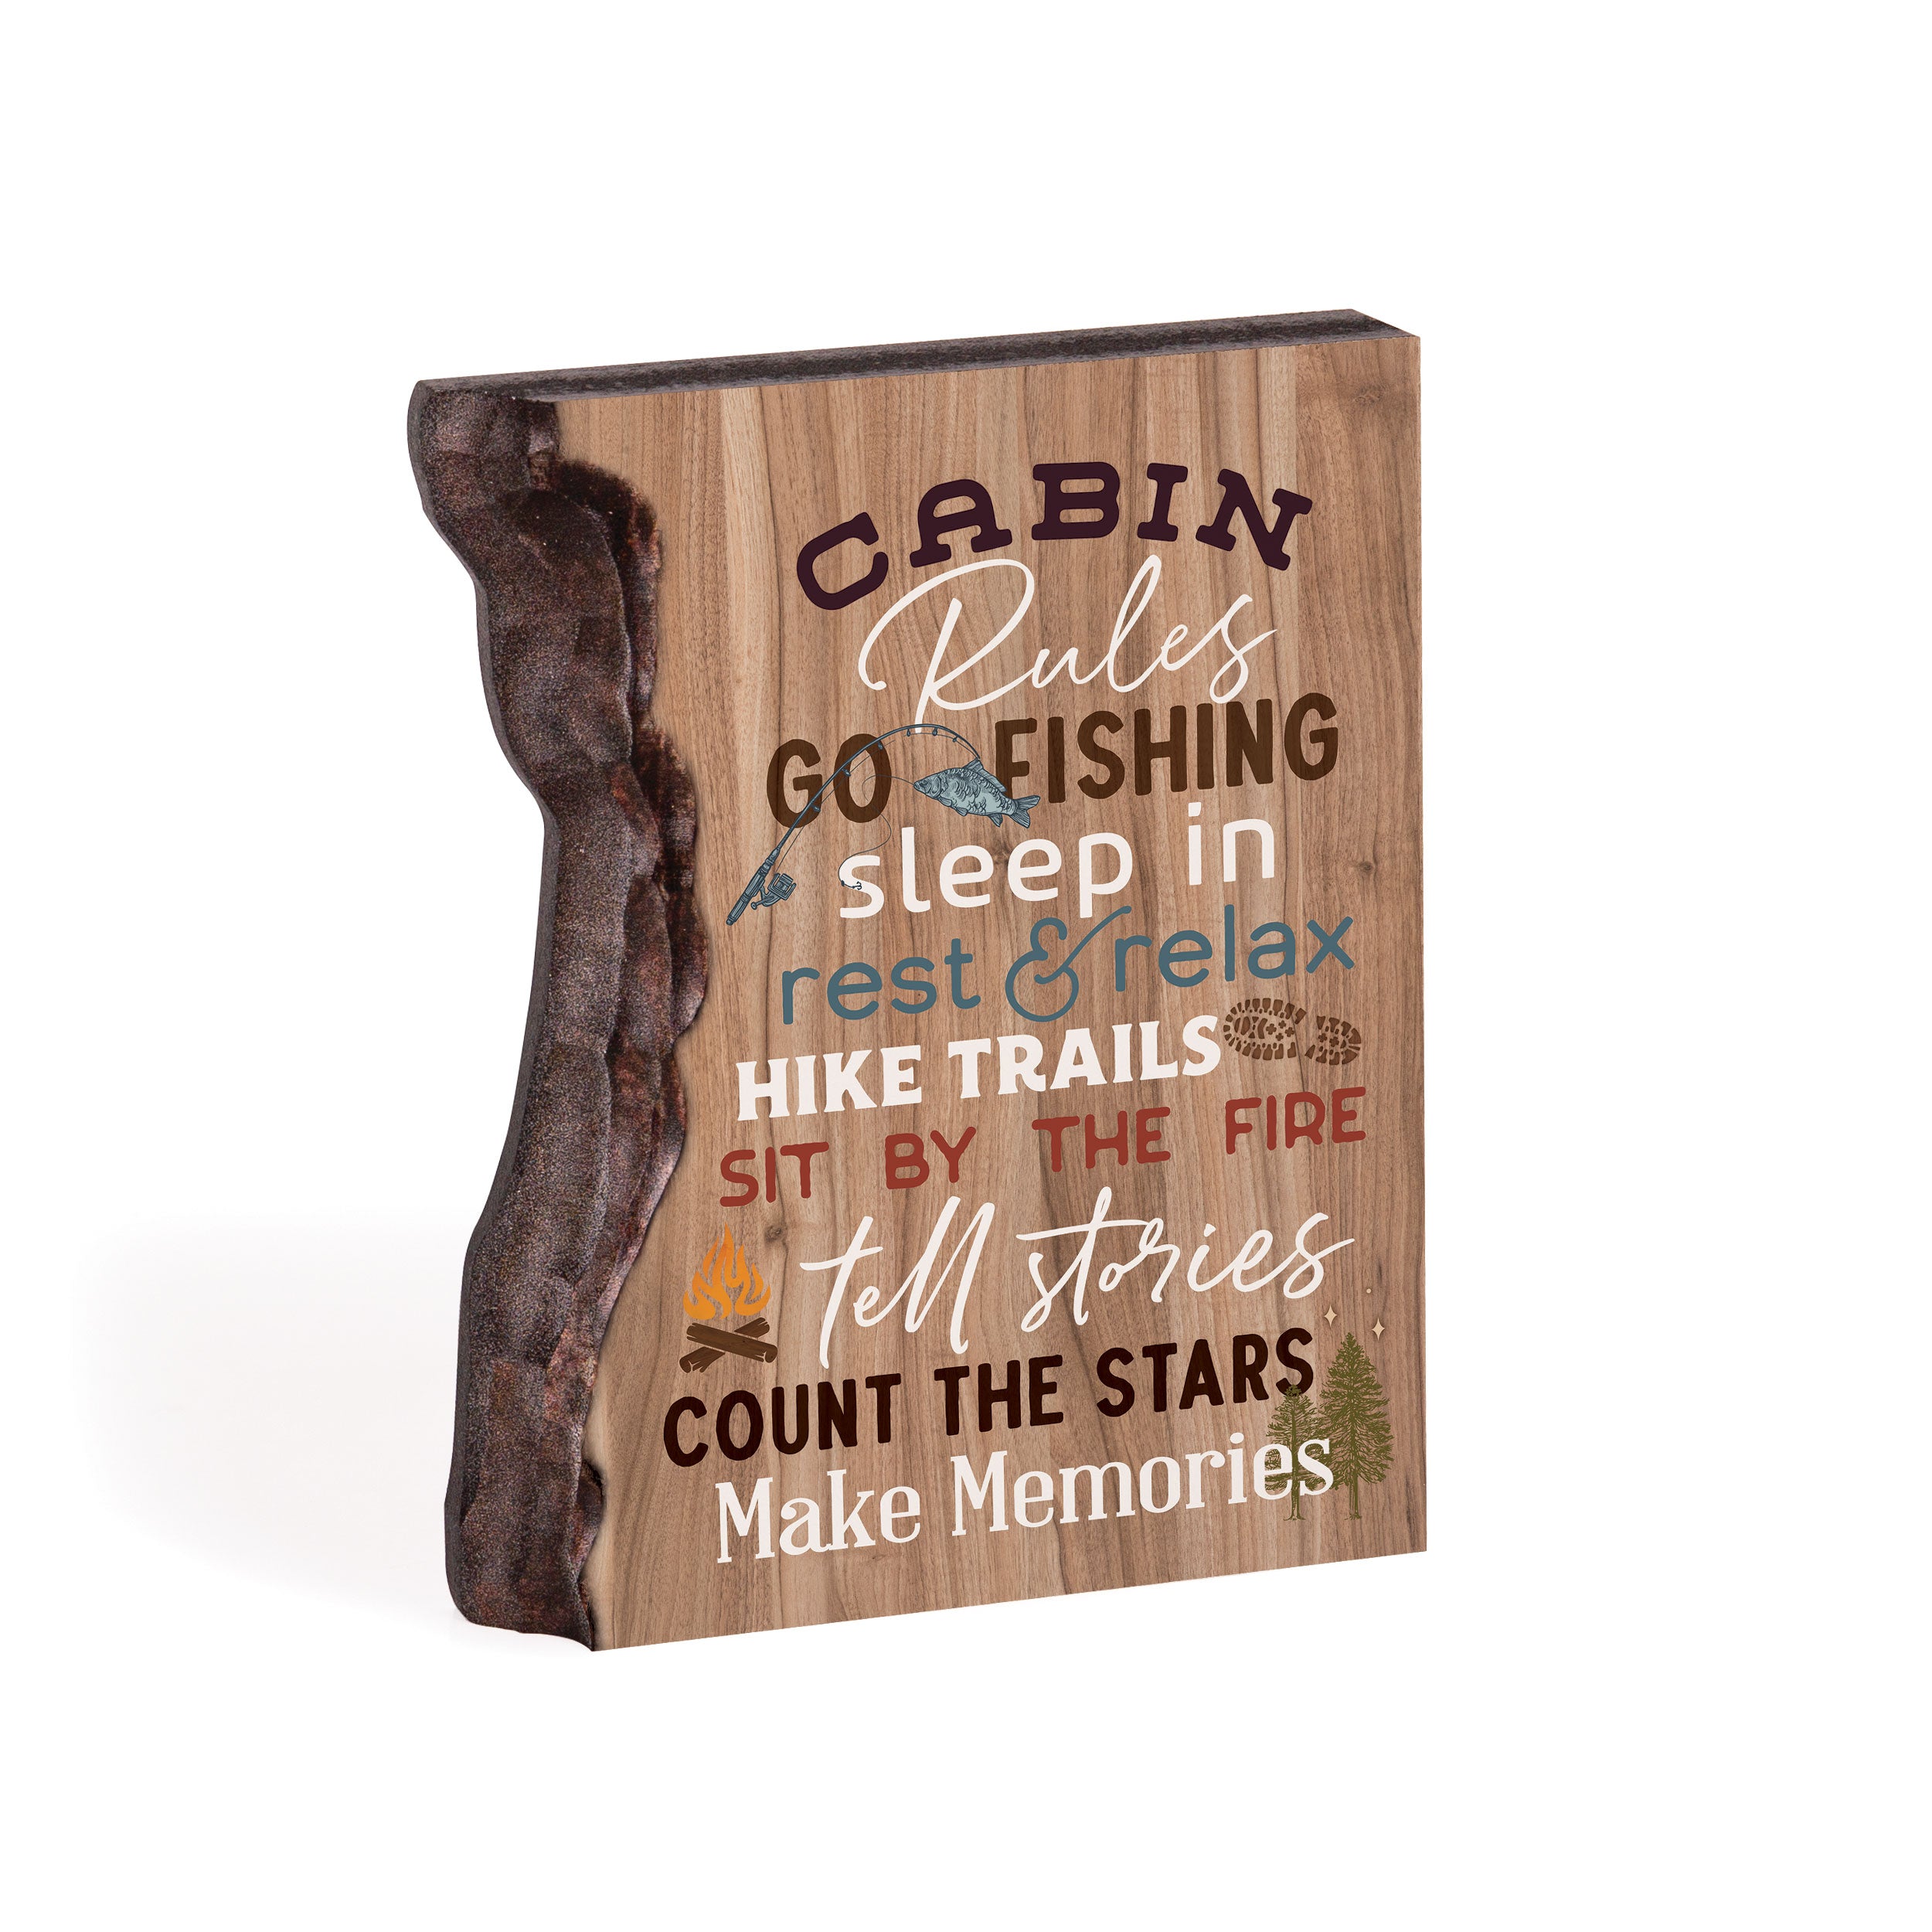 Cabin Rules Go Fishing Sleep In Rest And Relax Barky Sign